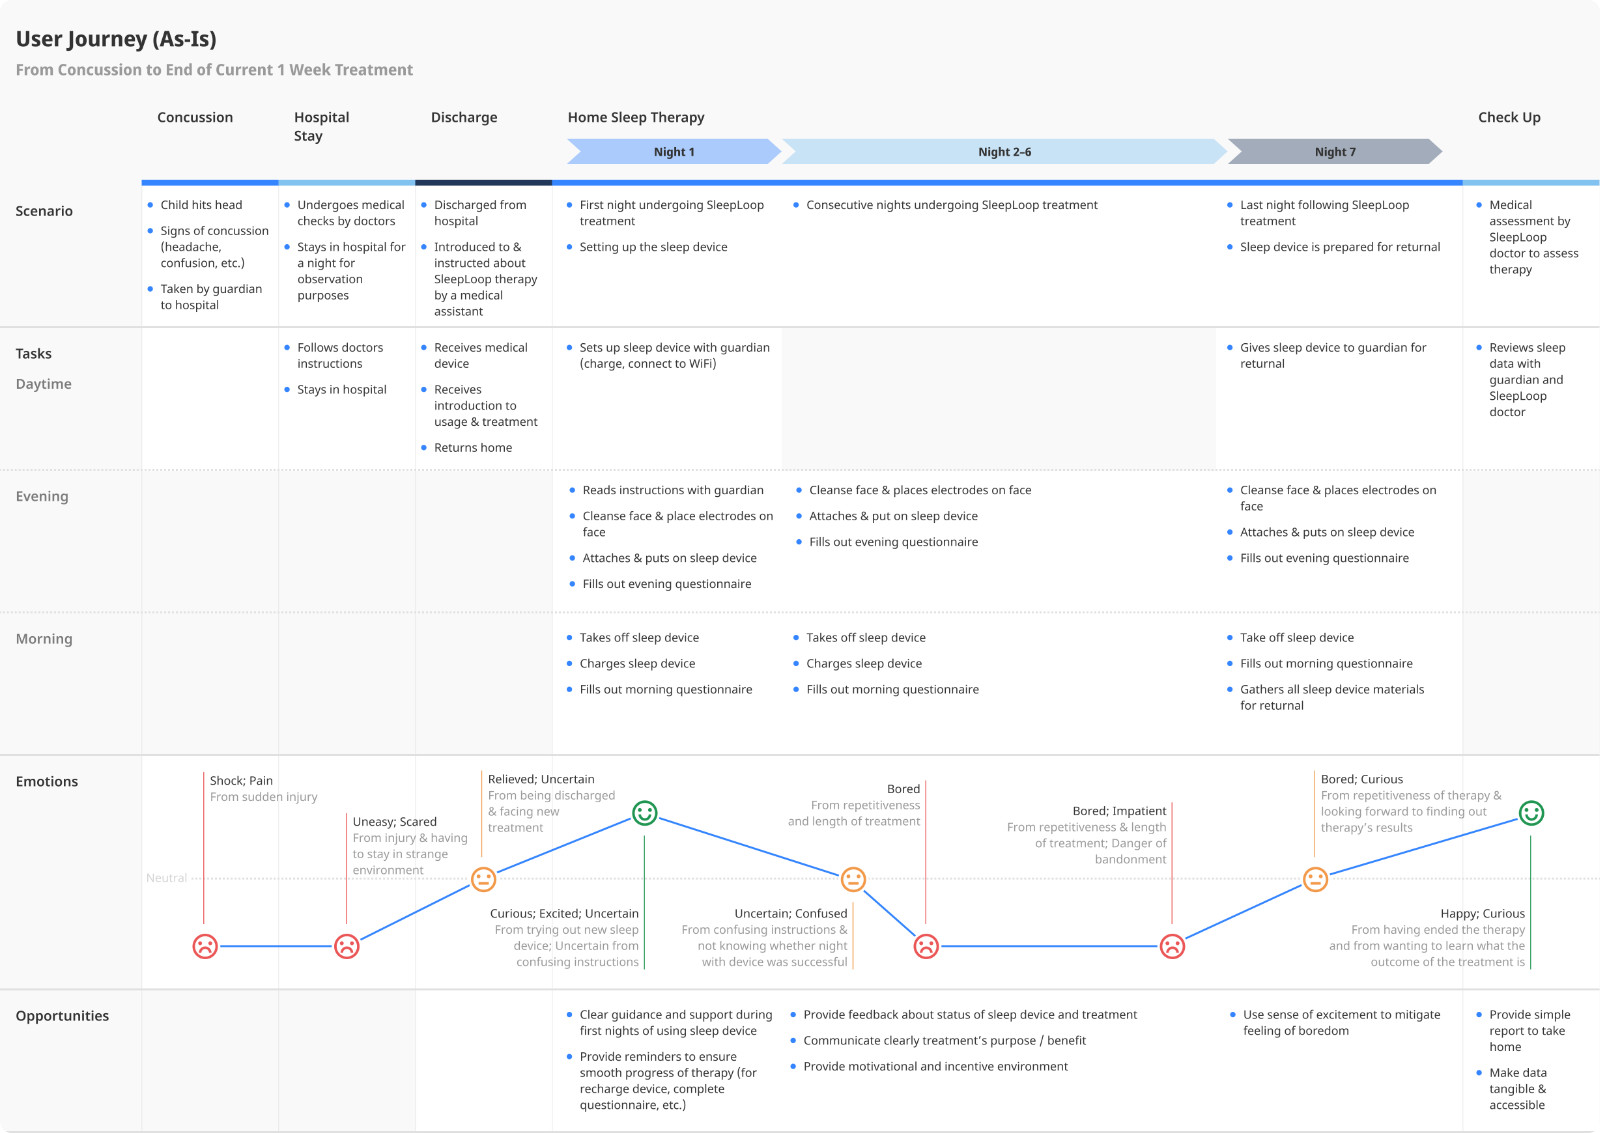 User Journey depicting a patient's experience from concussion to the sleep treatment's end